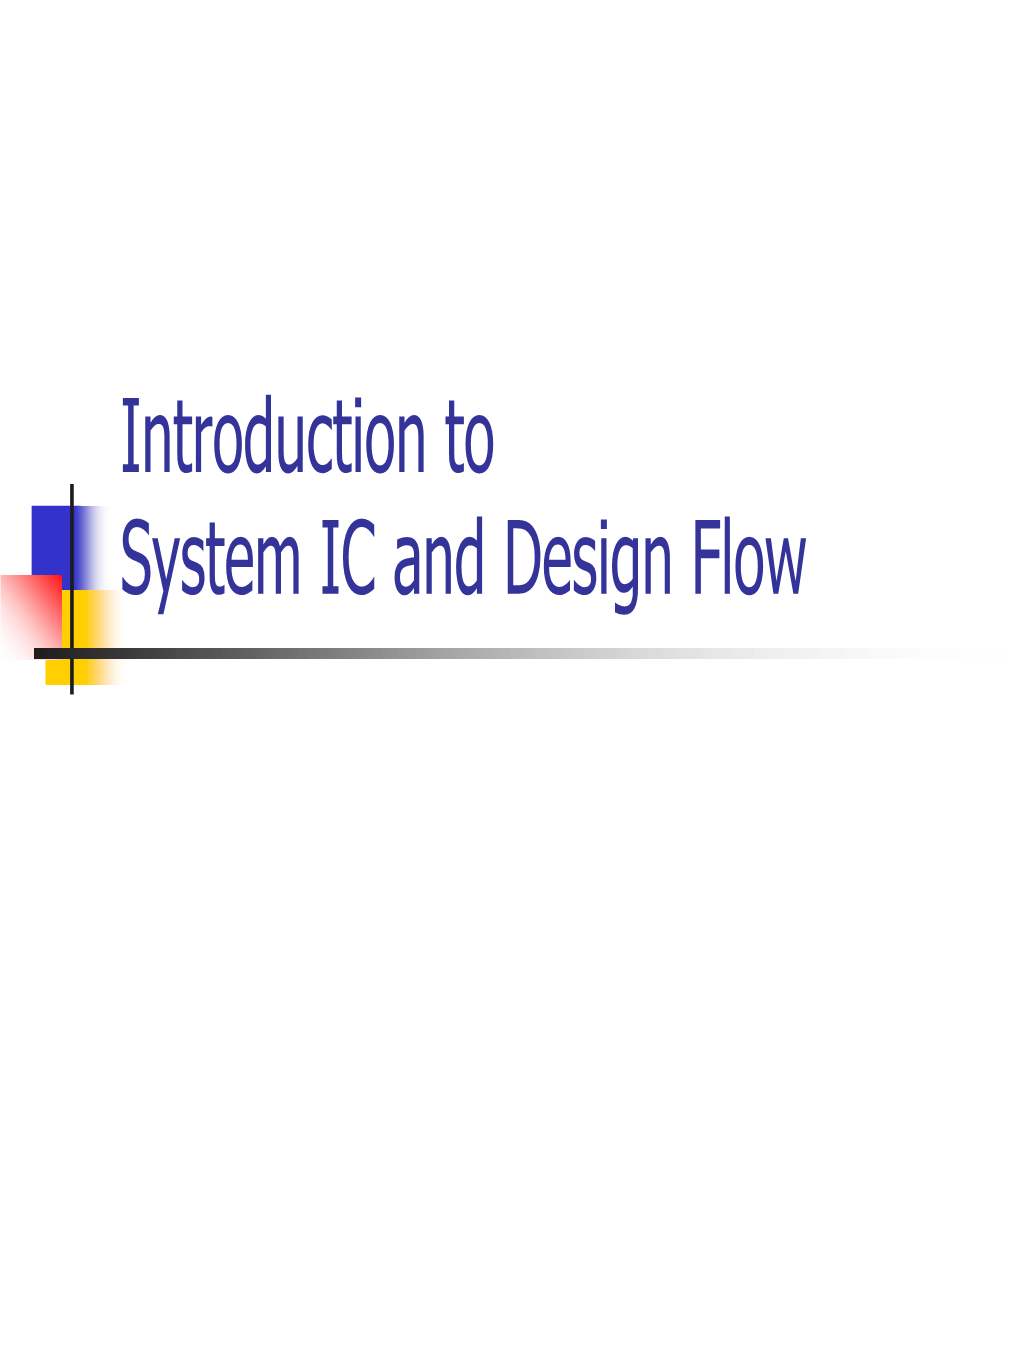 Introduction to System IC Design Flow